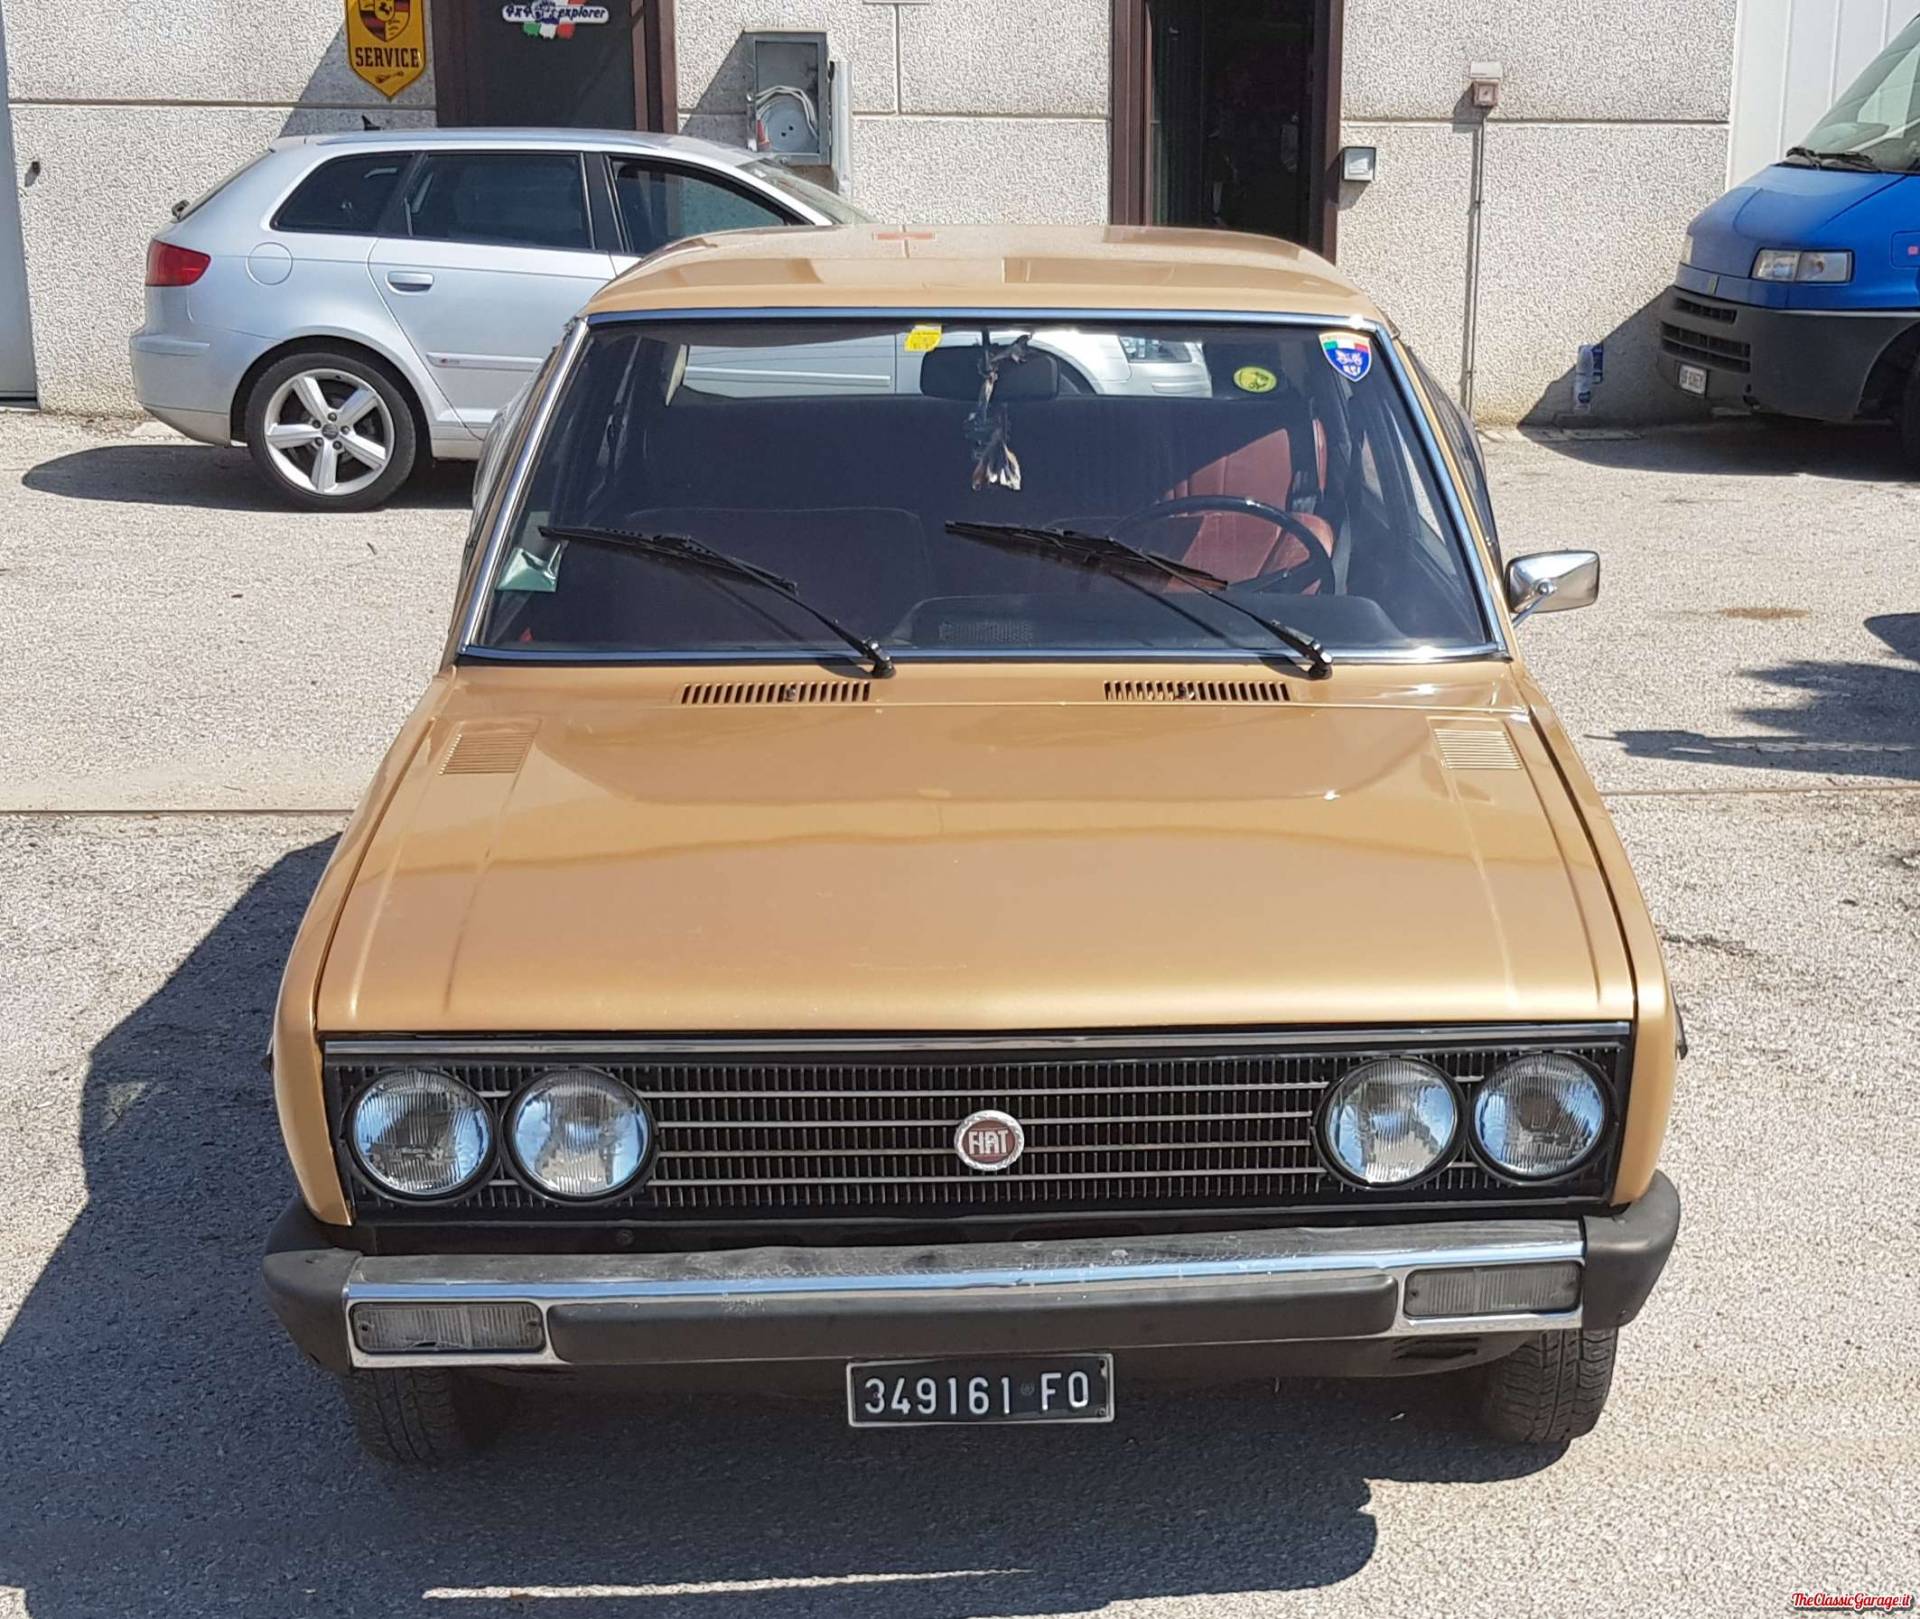 For Sale FIAT 131 S Mirafiori (1976) offered for AUD 8,712